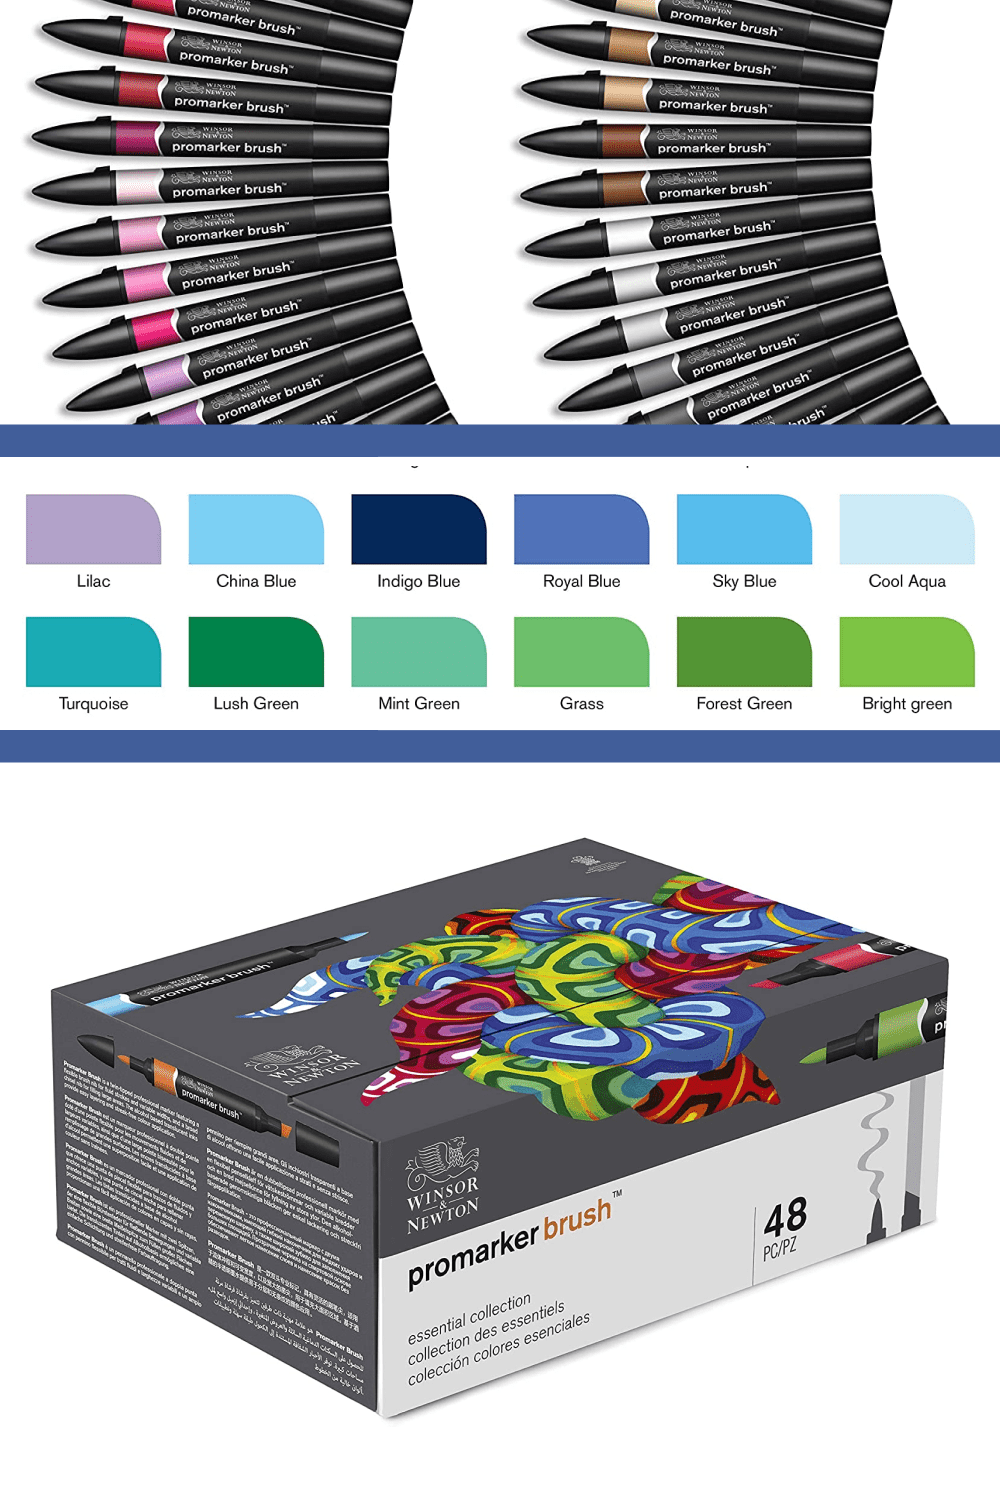 All graphic markers have a brush tip for full coverage.